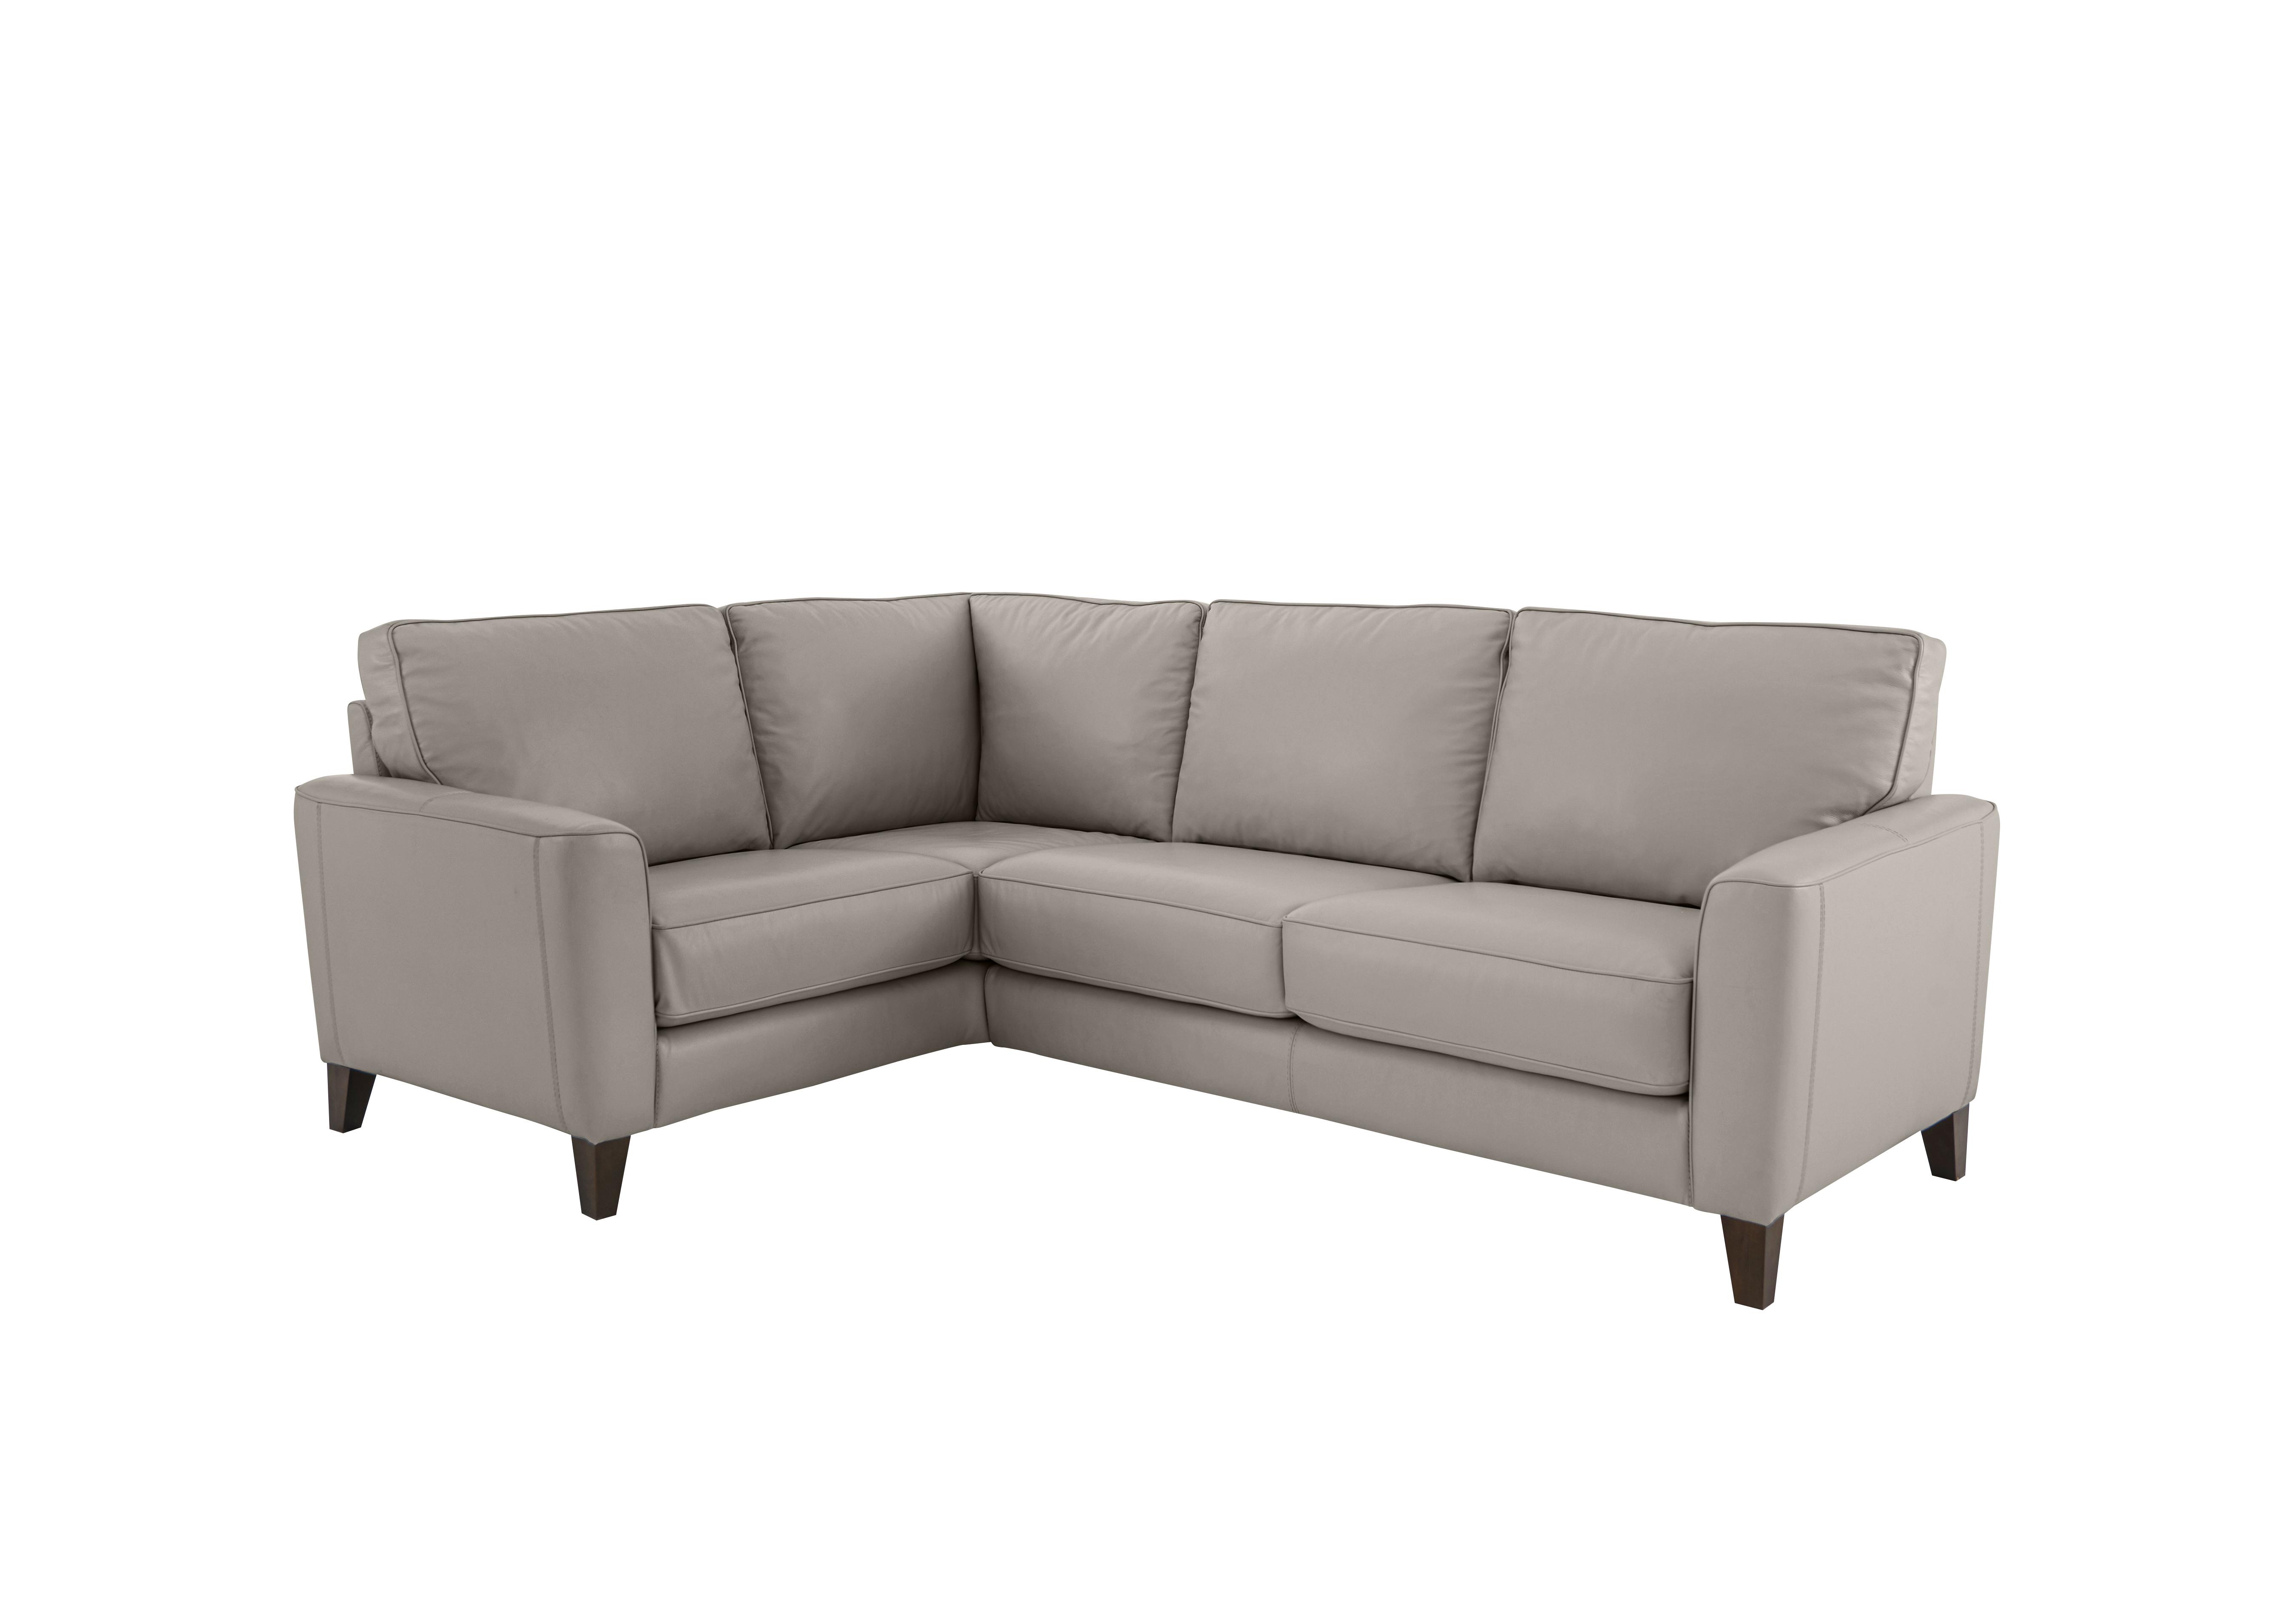 Brondby Small Leather Corner Sofa in Bv-946b Silver Grey on Furniture Village